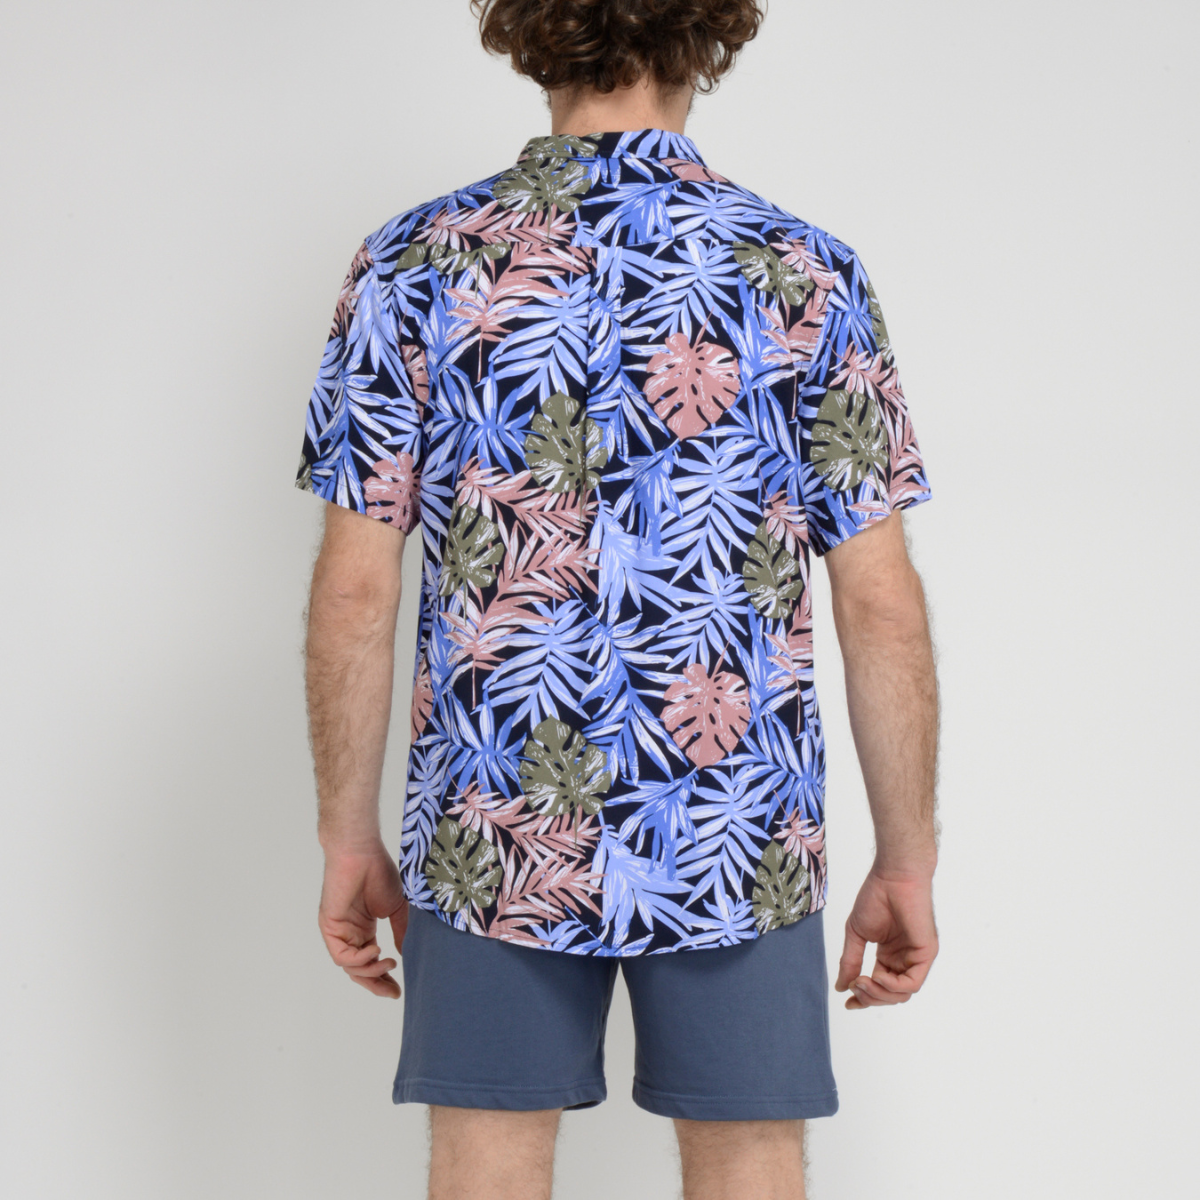 CAMISA MC KAGAROO - RAPPORT NAVY WITH FLOWERS - IN87